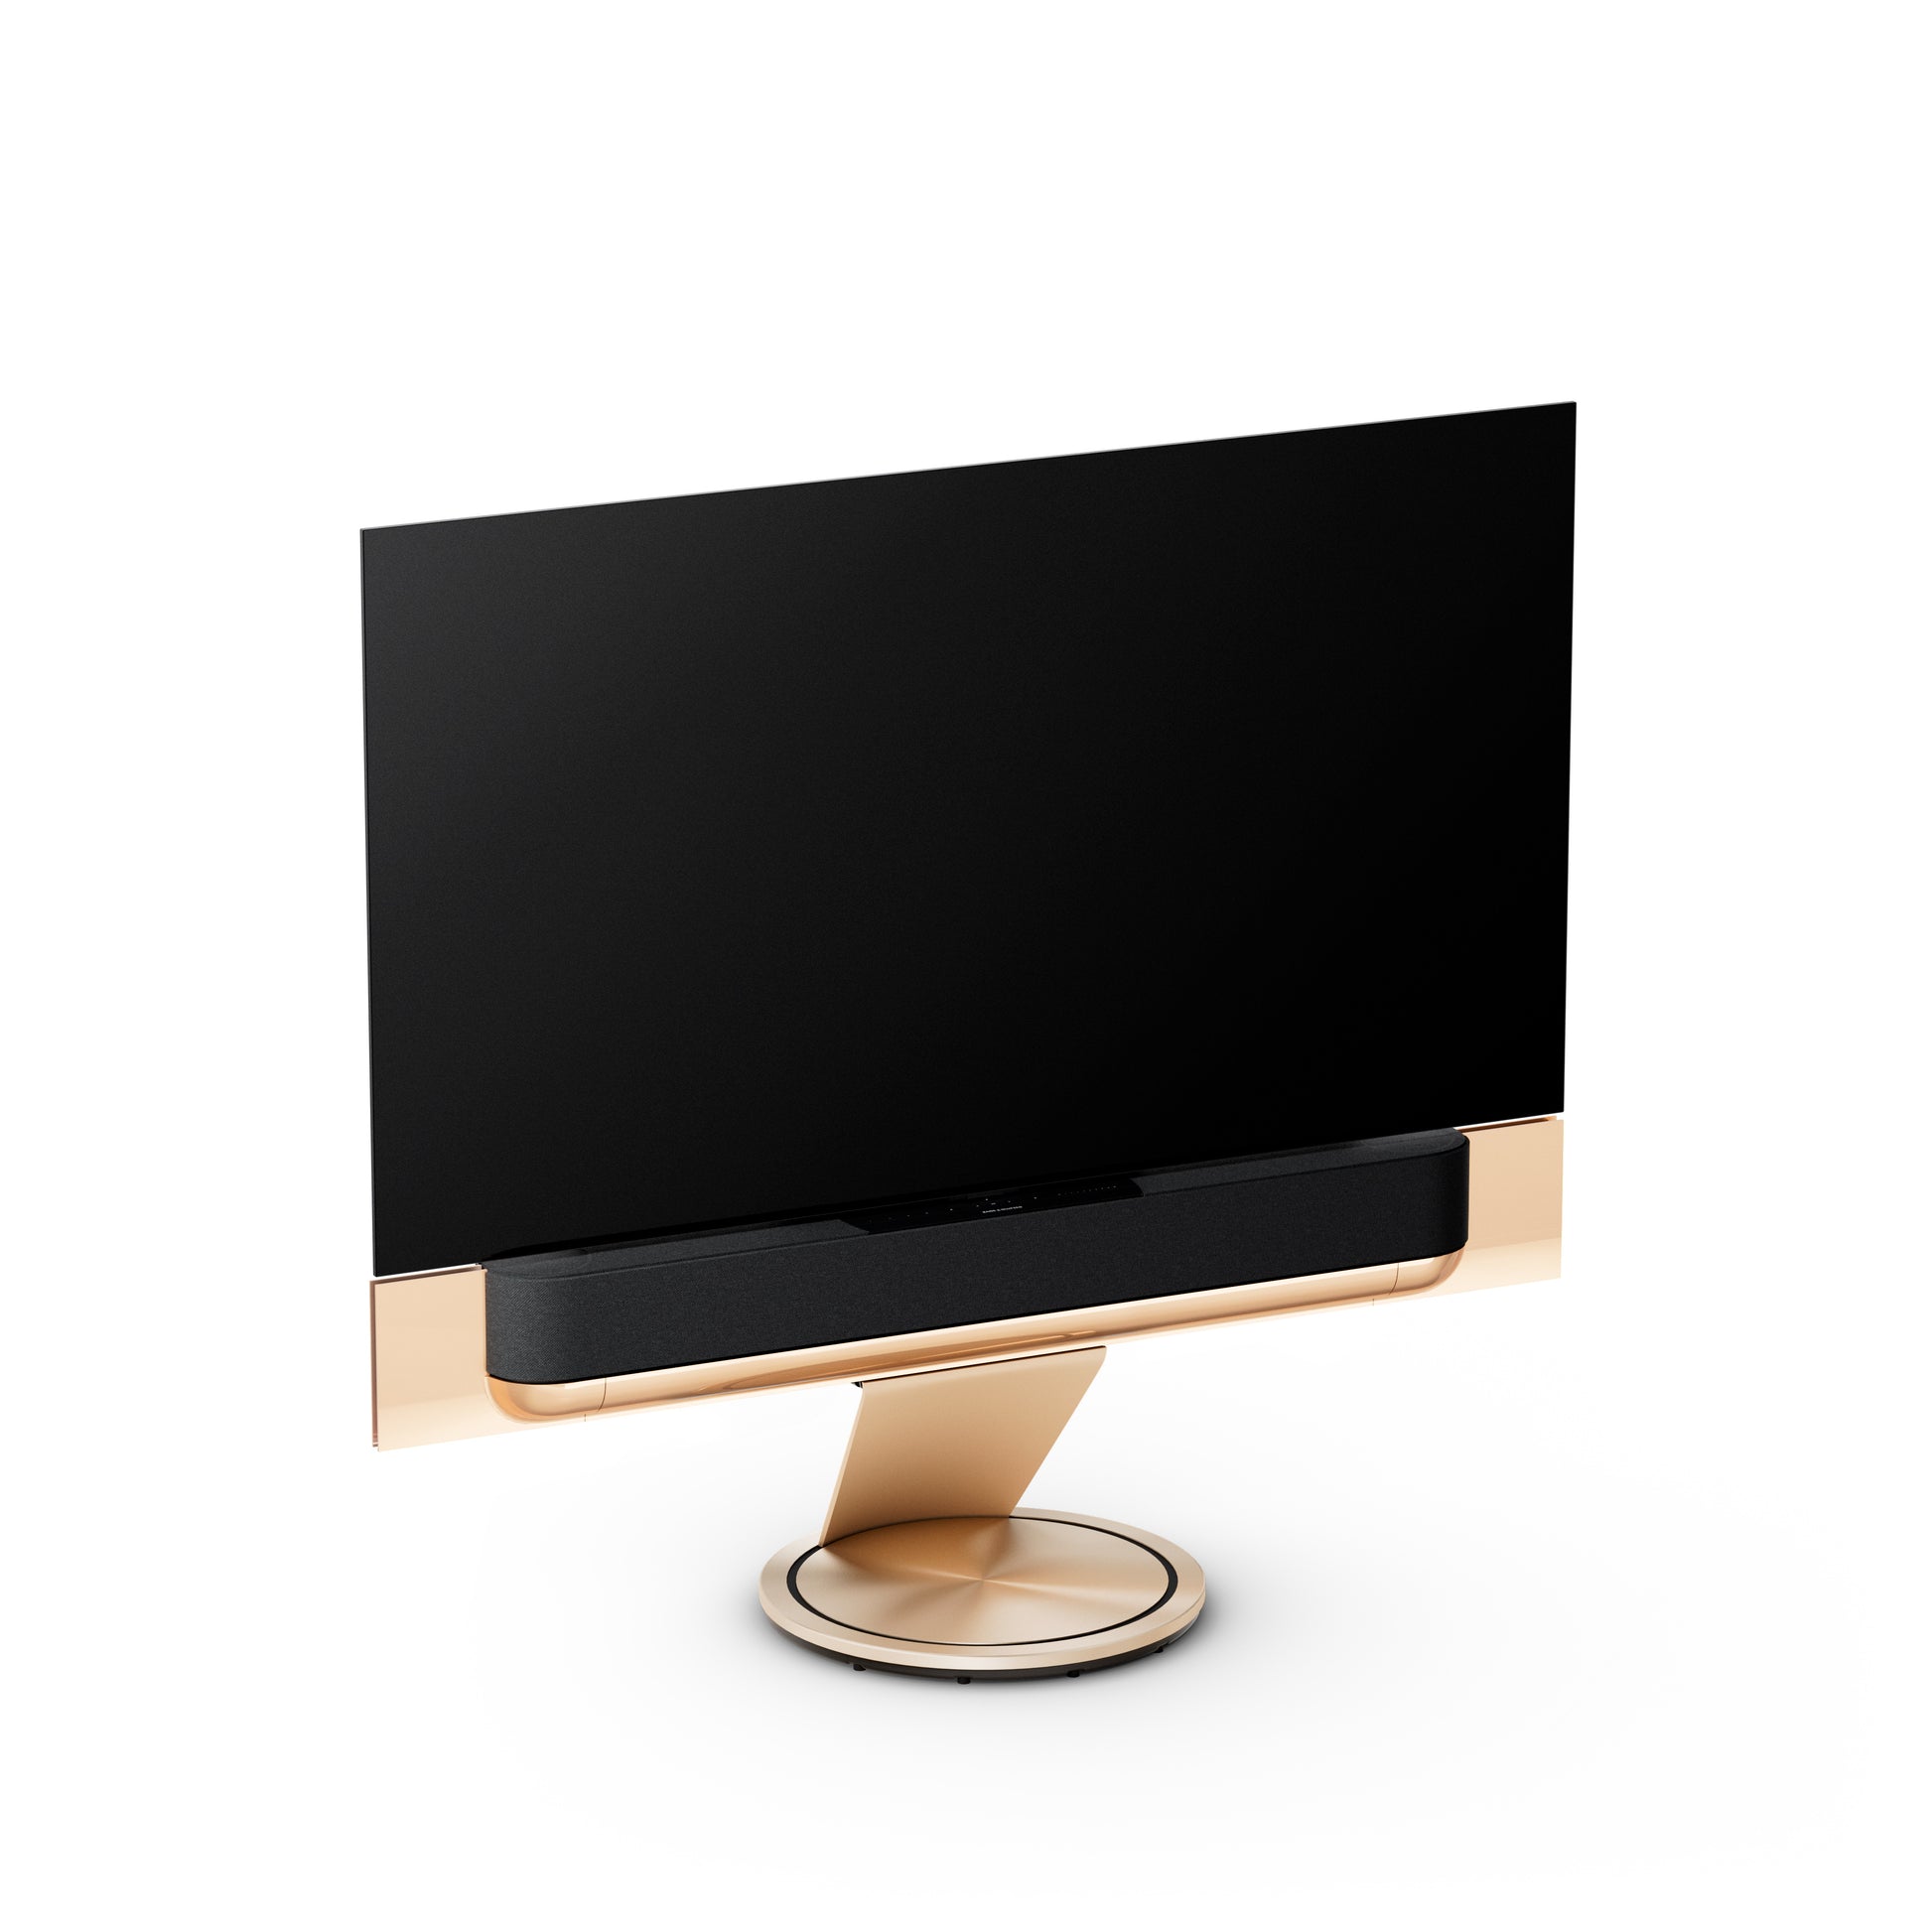 BeoSound Theatre in gold tone as TV in 65 inches  with cover in grey melange on floor stand